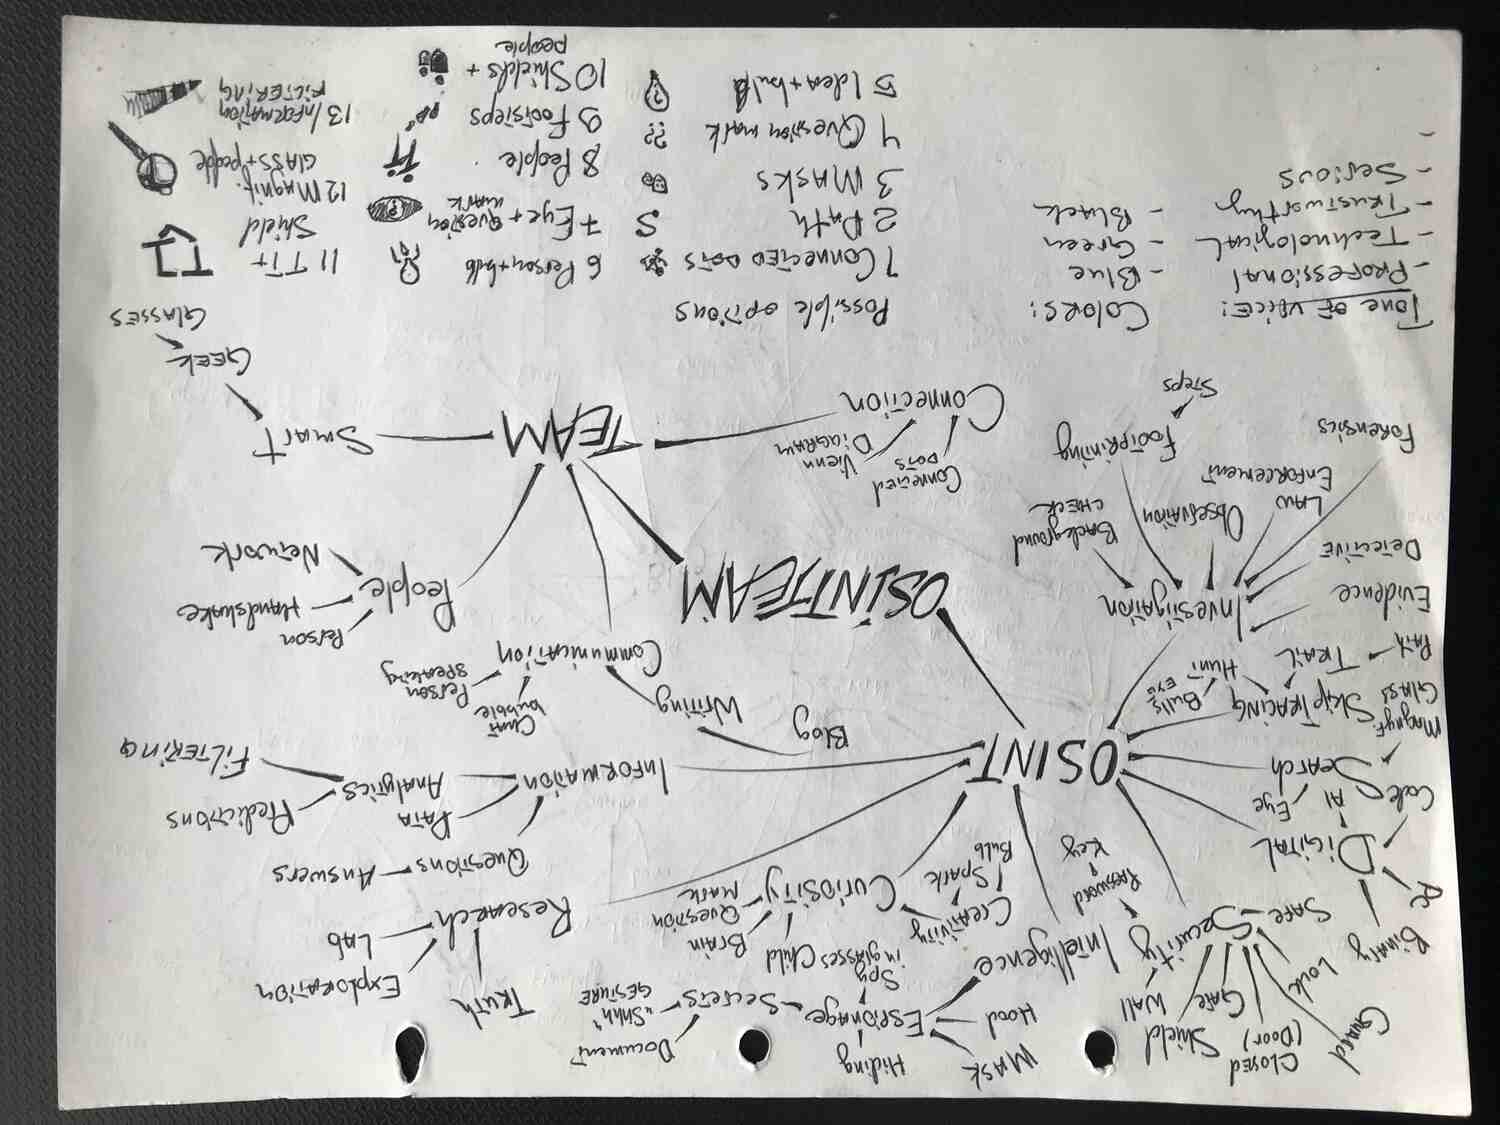 A mind map of associations serves to create a relevant brand language